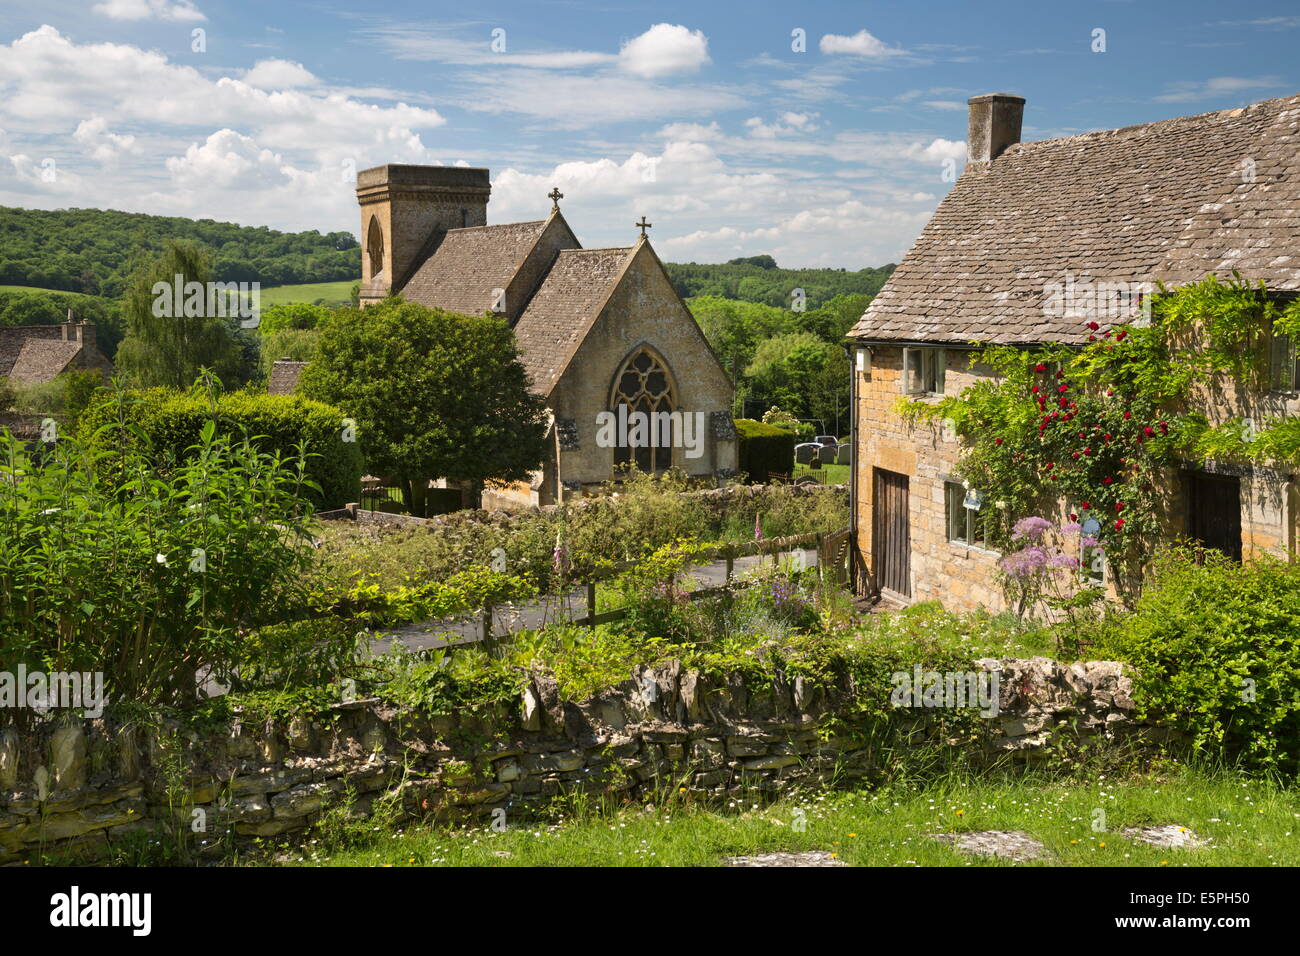 St. Barnabas Church and rose covered Cotswold cottage, Snowshill, Cotswolds, Gloucestershire, England, United Kingdom, Europe Stock Photo